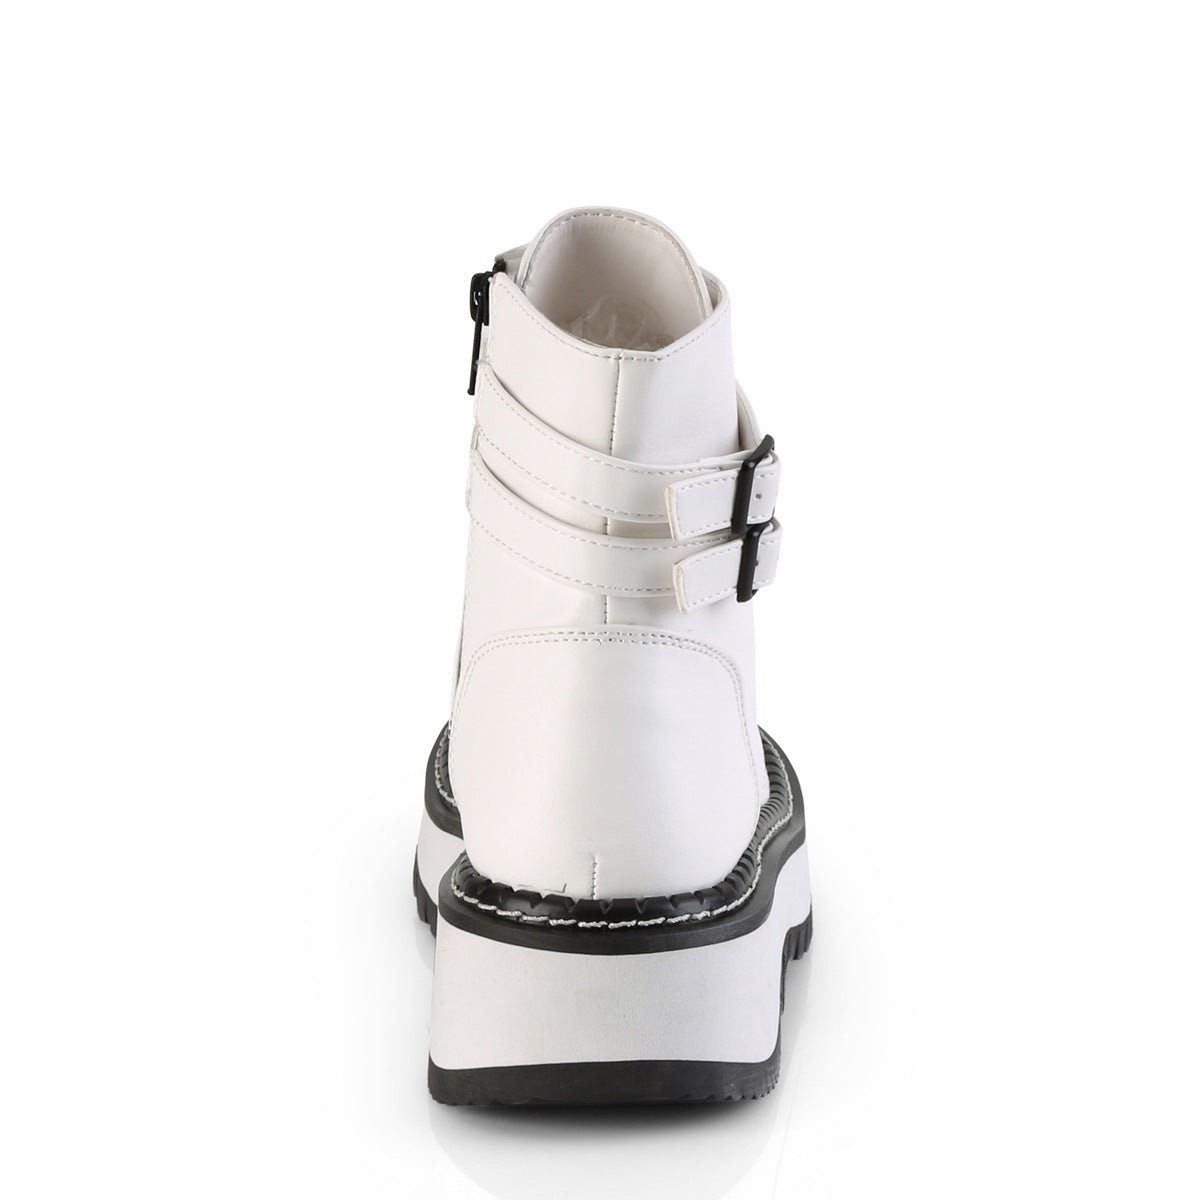 Too Fast | Demonia Lilith 152 | White Vegan Leather Women's Ankle Boots